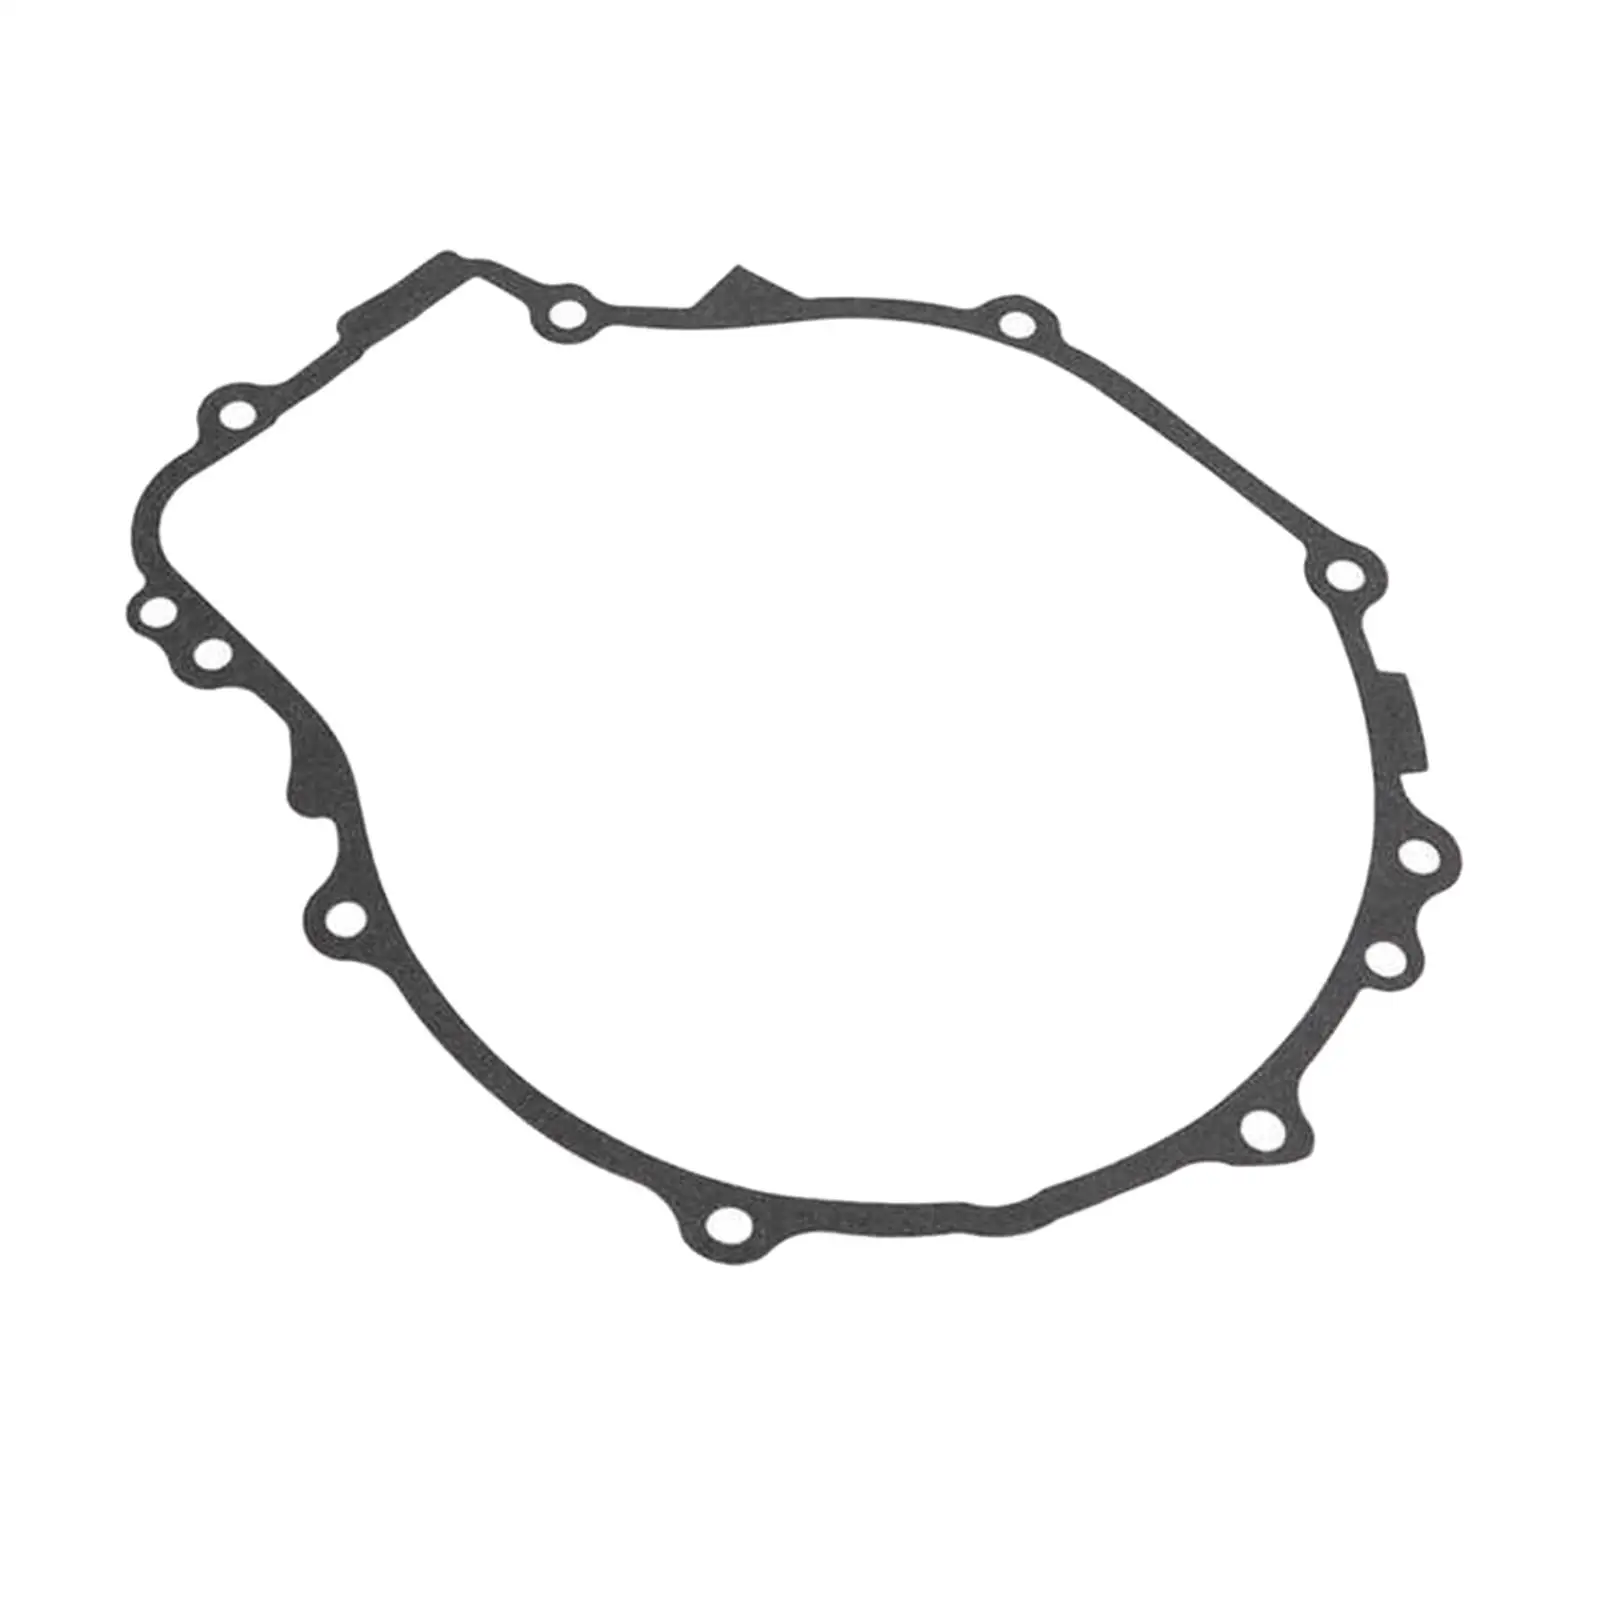 Car Pull Start Gasket 3084933 for Polaris Sportsman 500 1996?2011 Accessory Durable